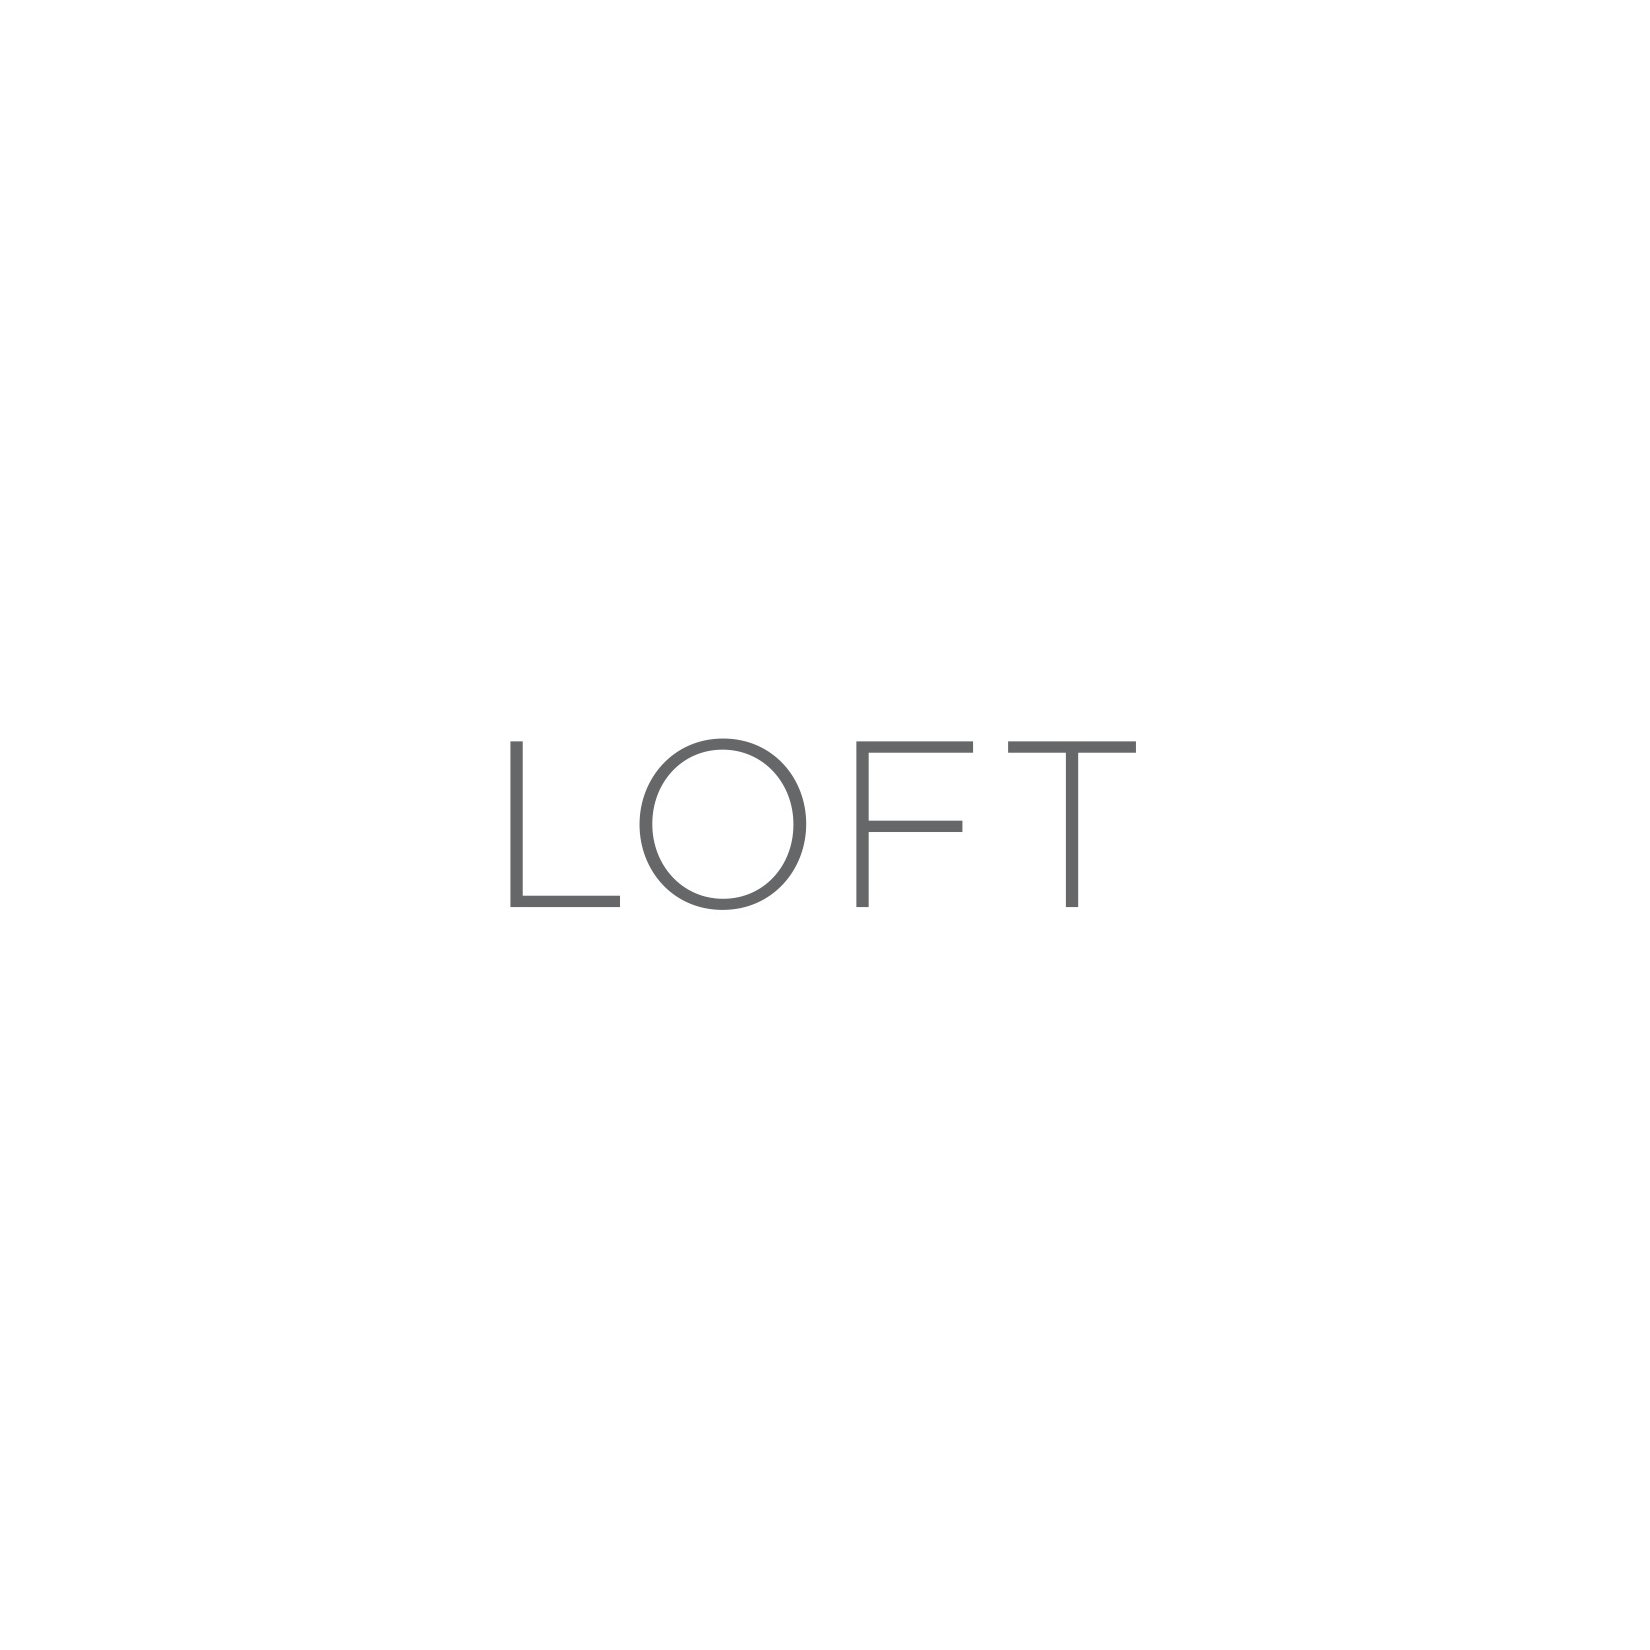 Loft Mansfield Crossing Women S Clothing Petites Dresses Pants Shirts Sweaters In Mansfield Ma [ 1650 x 1650 Pixel ]